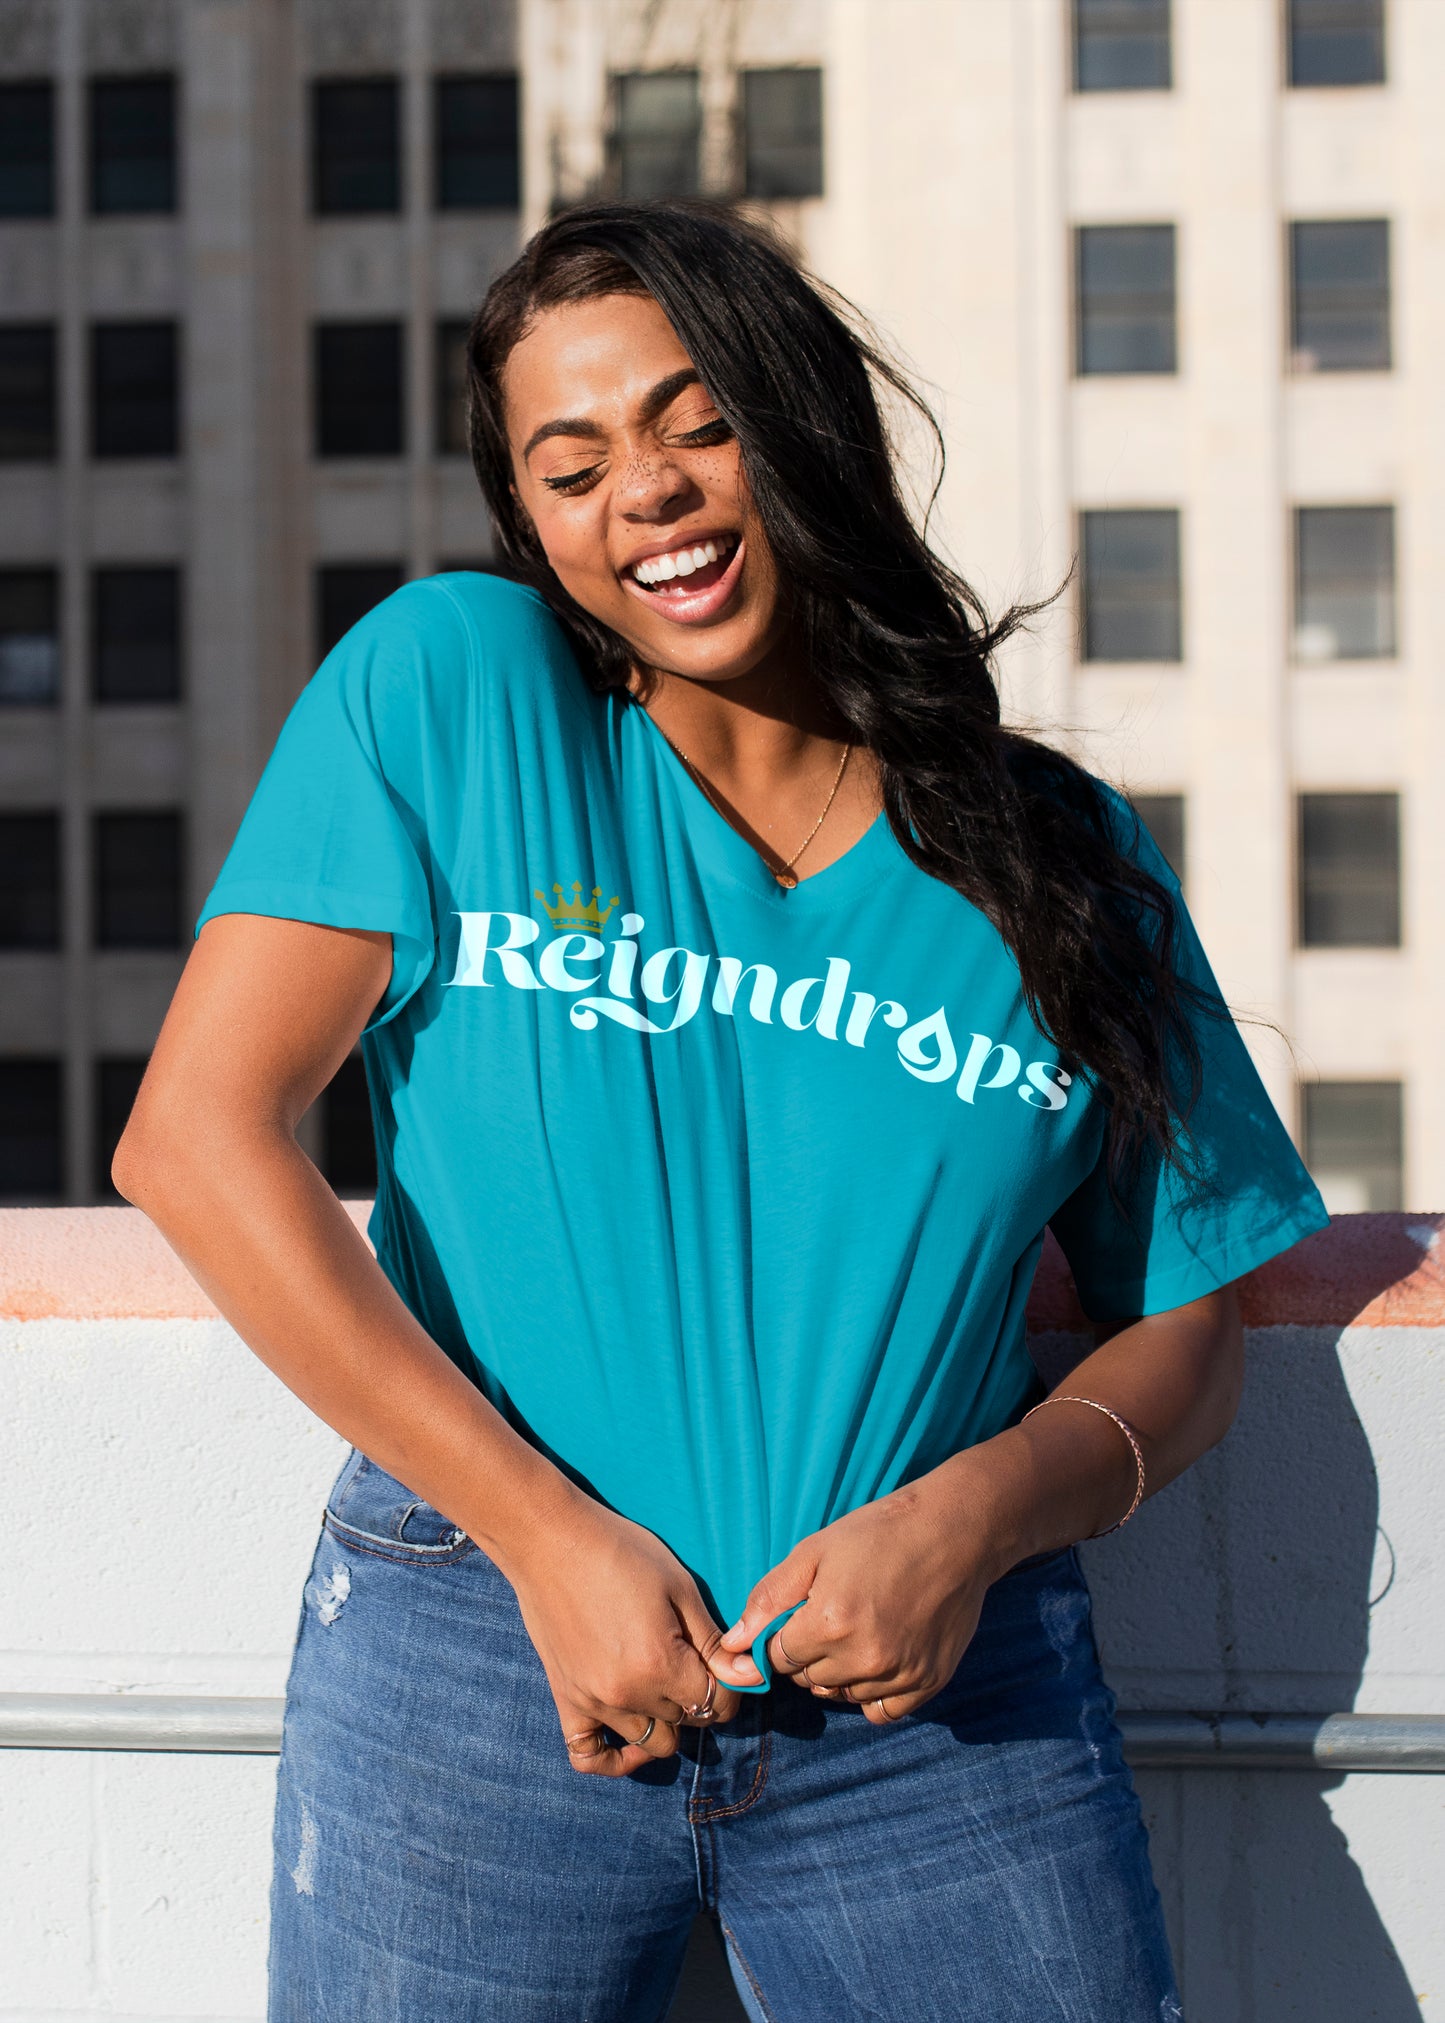 Reigndrops Tee for Women